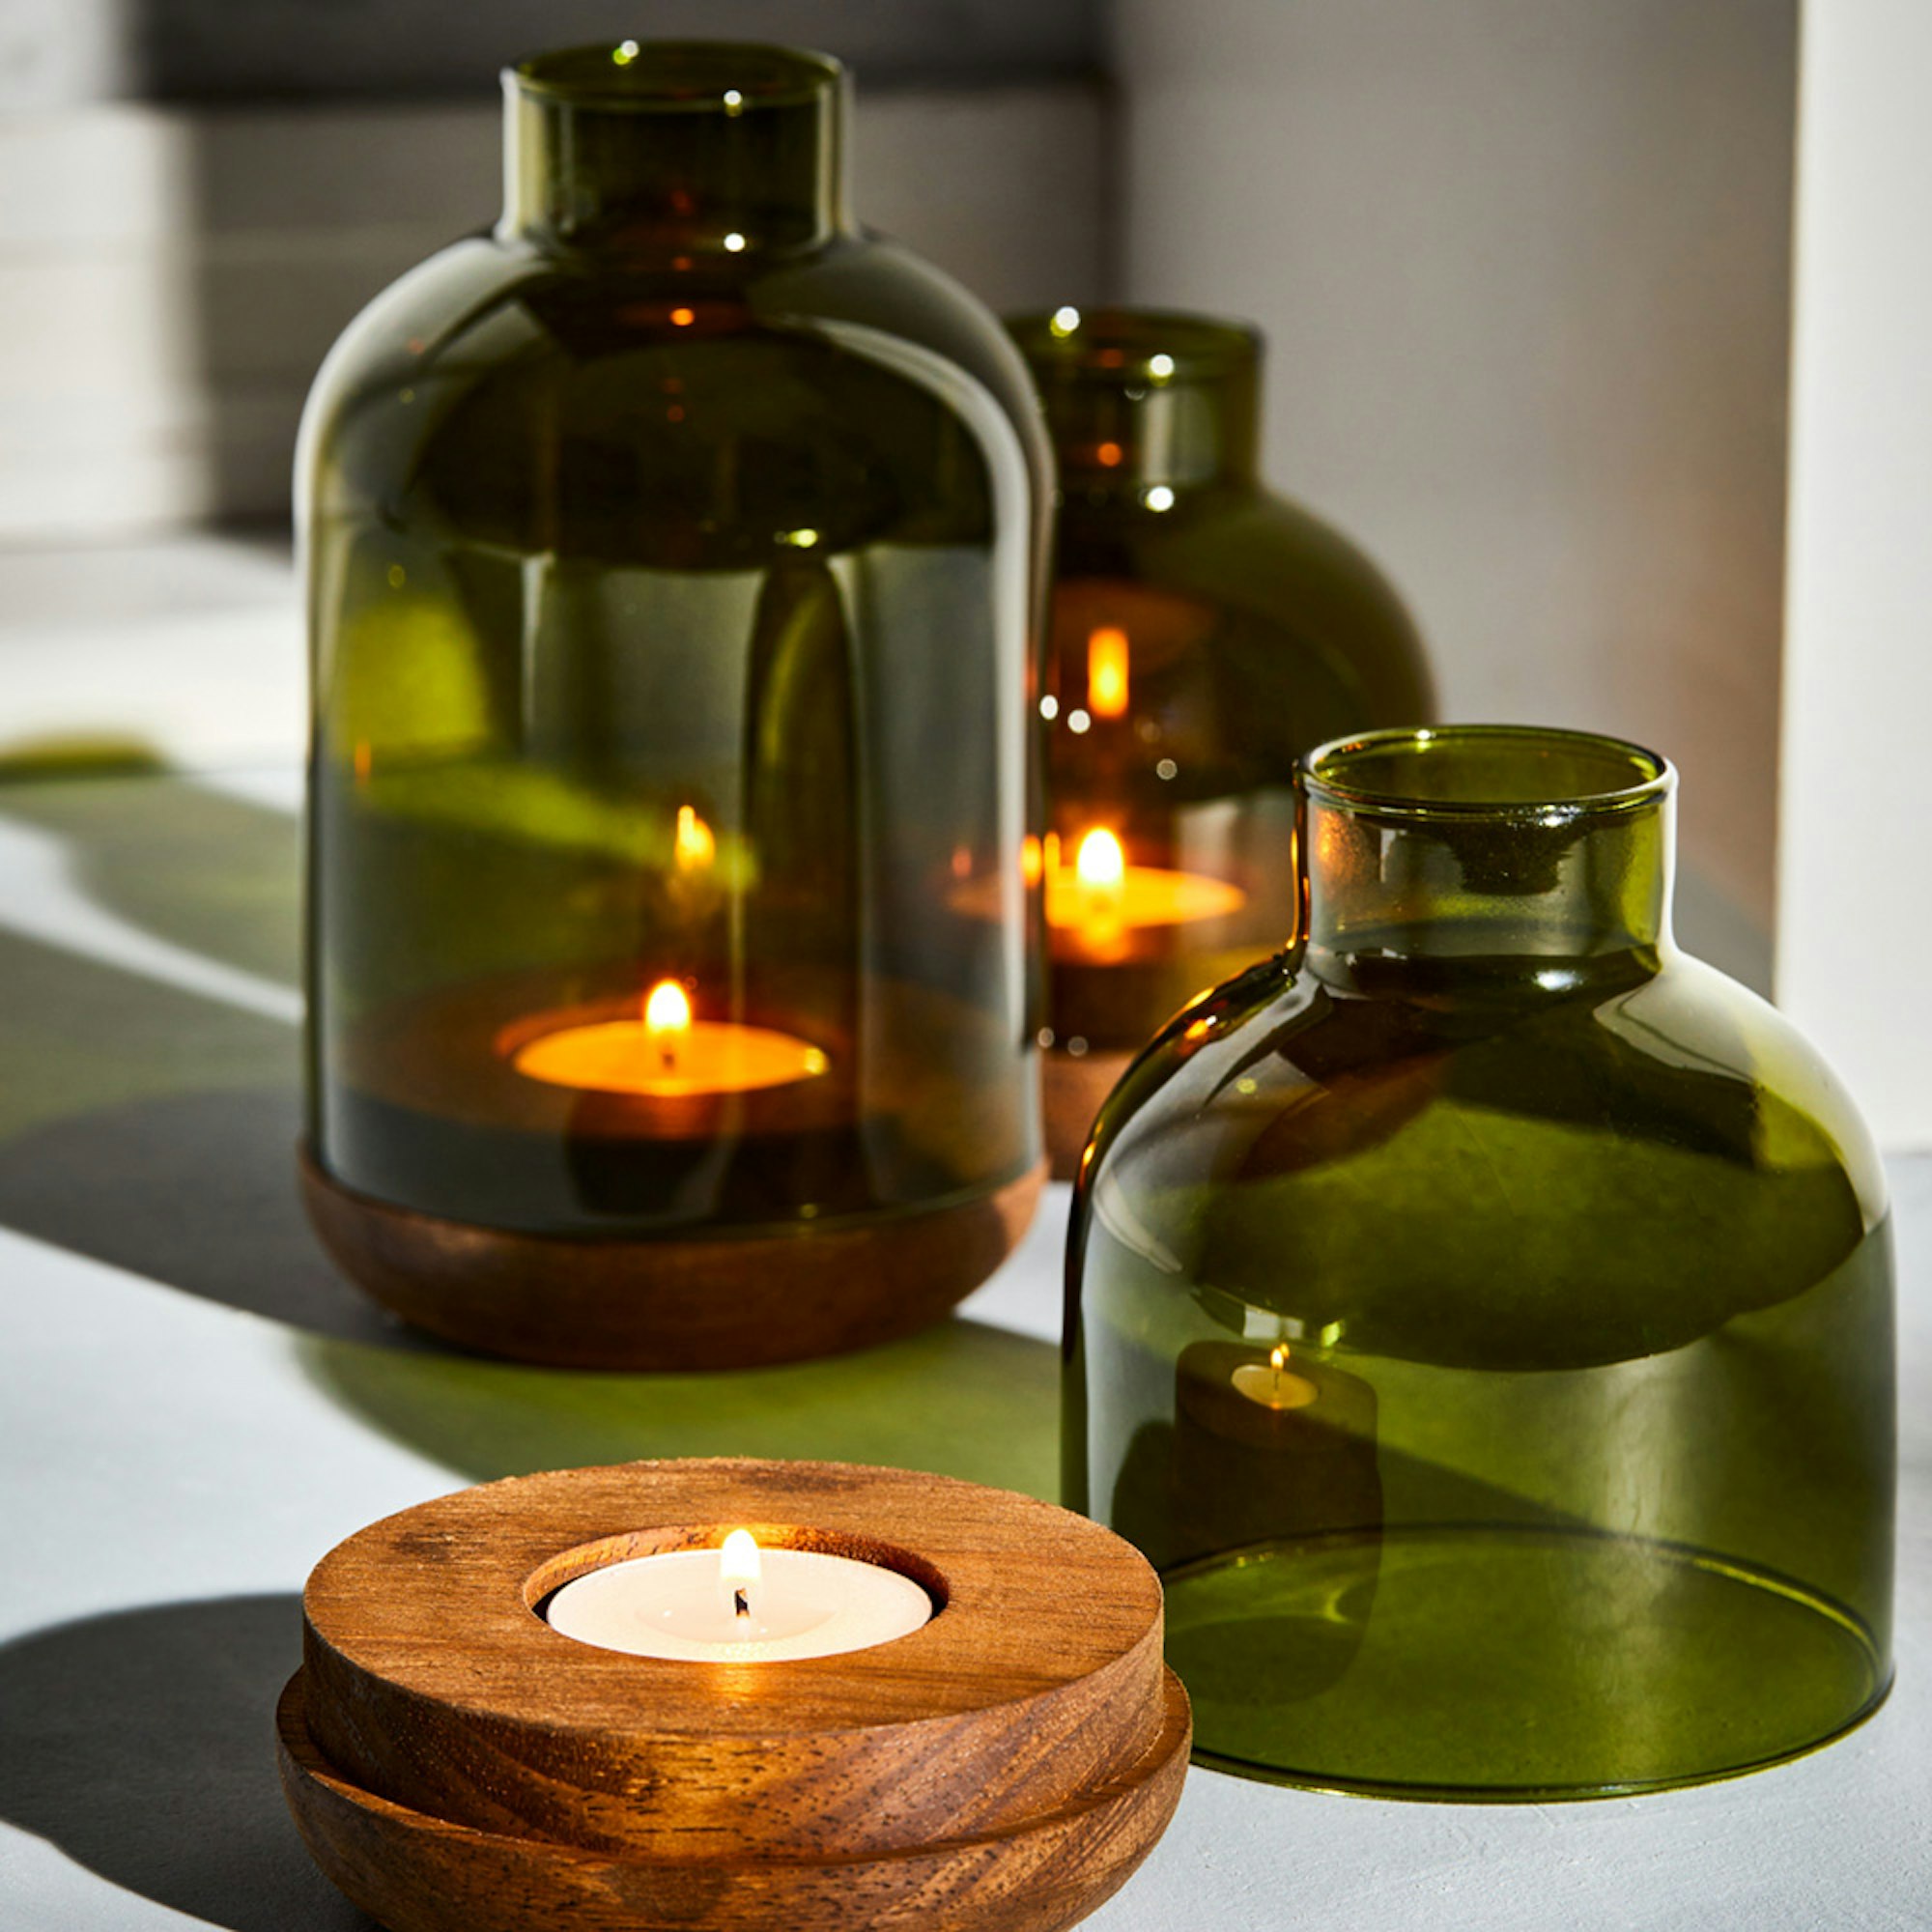 Neale Whitaker SS23 Cloche in Green. Set of 3 green cloches with wooden bases lit with tealight candles.